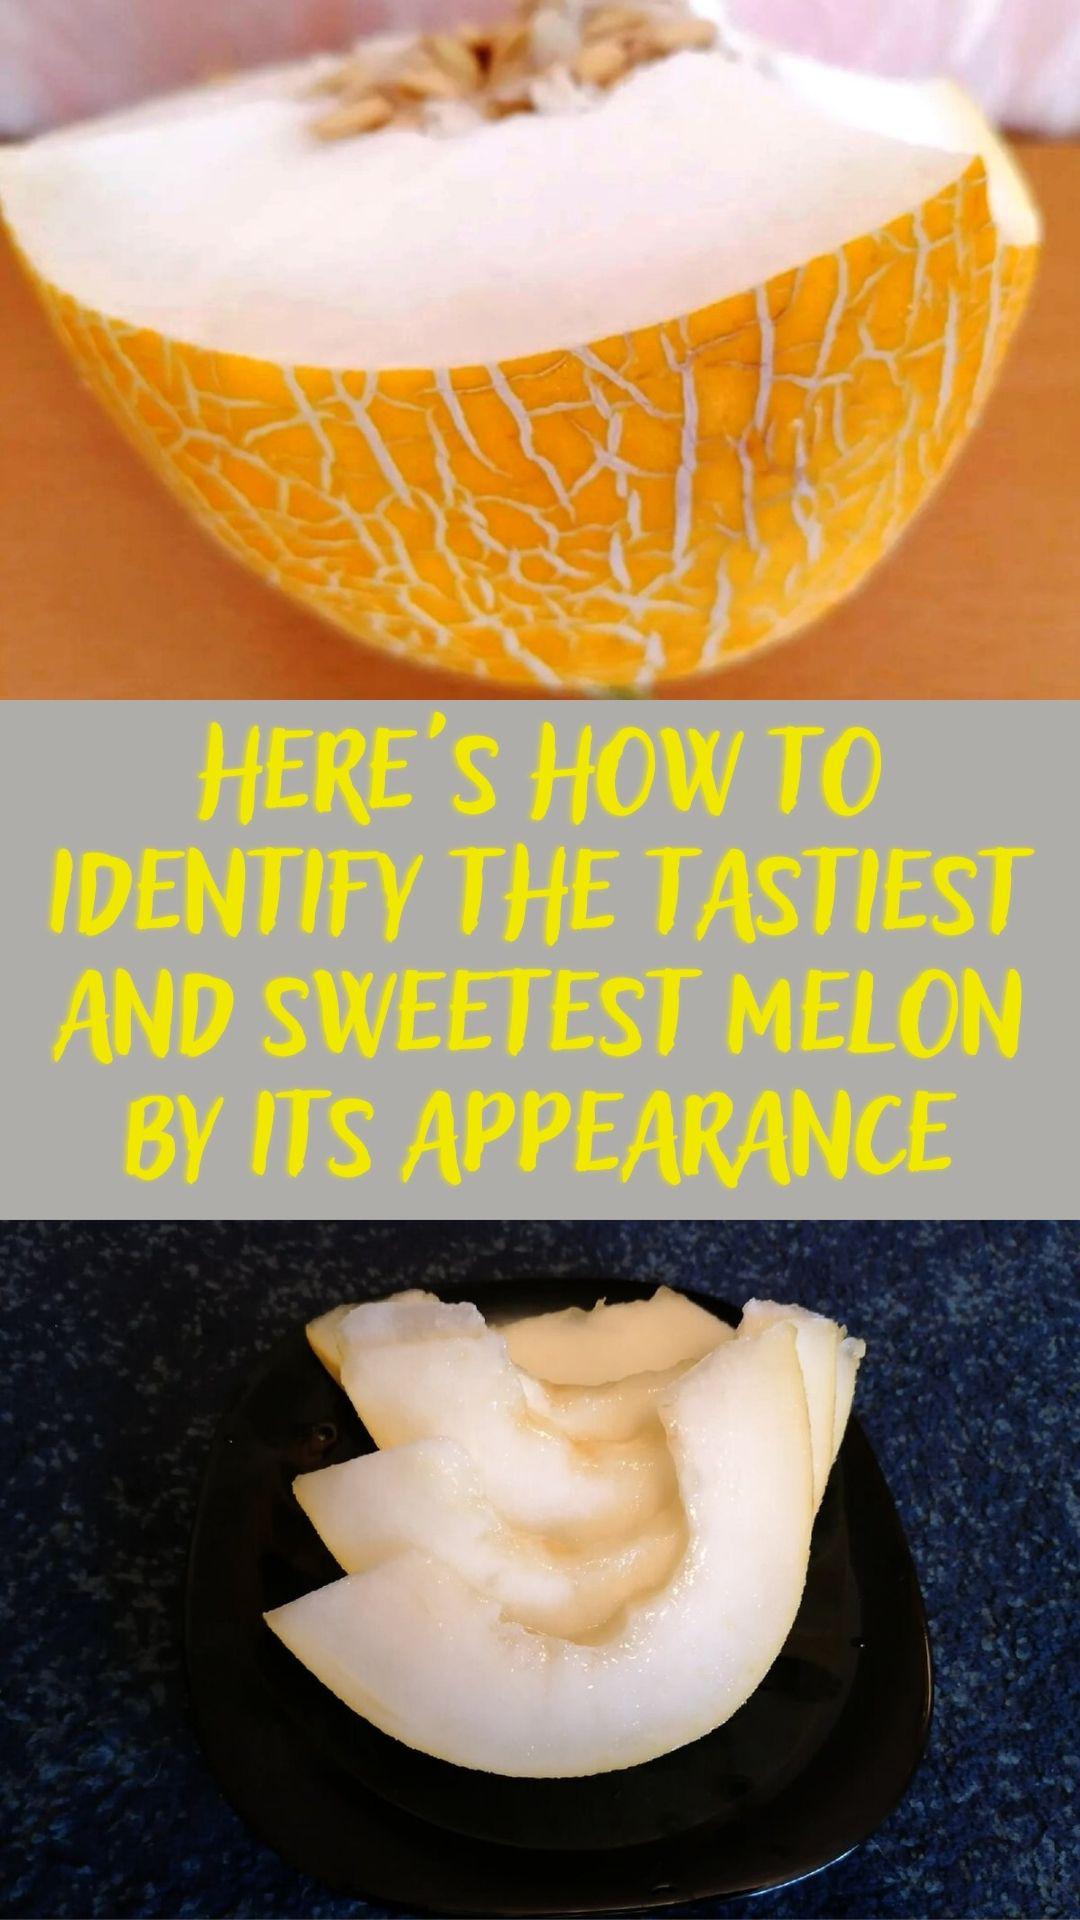 Here's how to identify the tastiest and sweetest melon by its appearance